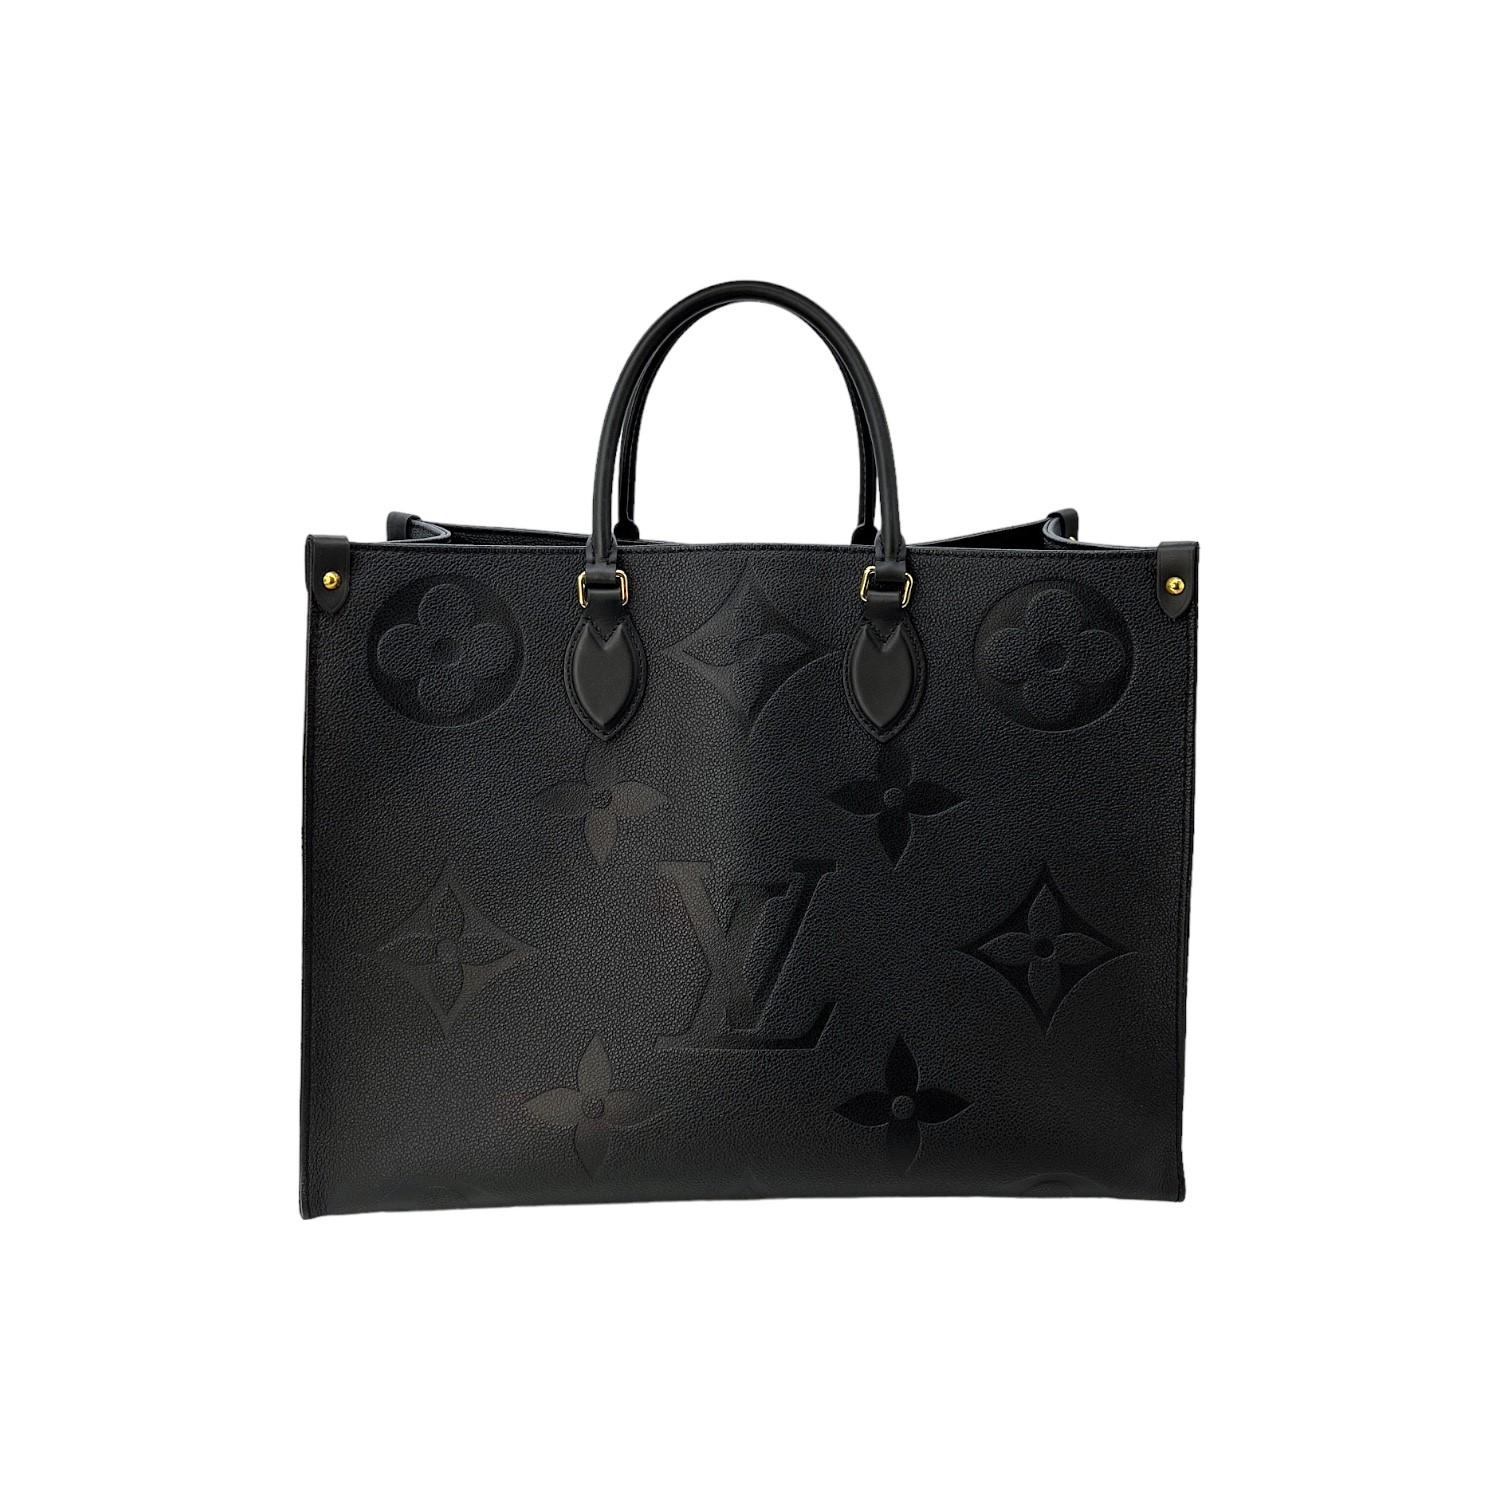 This Louis Vuitton Onthego GM is finely crafted of a black Louis Vuitton Monogram Empreinte grained leather exterior with leather trimmings and gold-tone hardware features. It has dual rolled leather handles and it also has dual flat shoulder straps